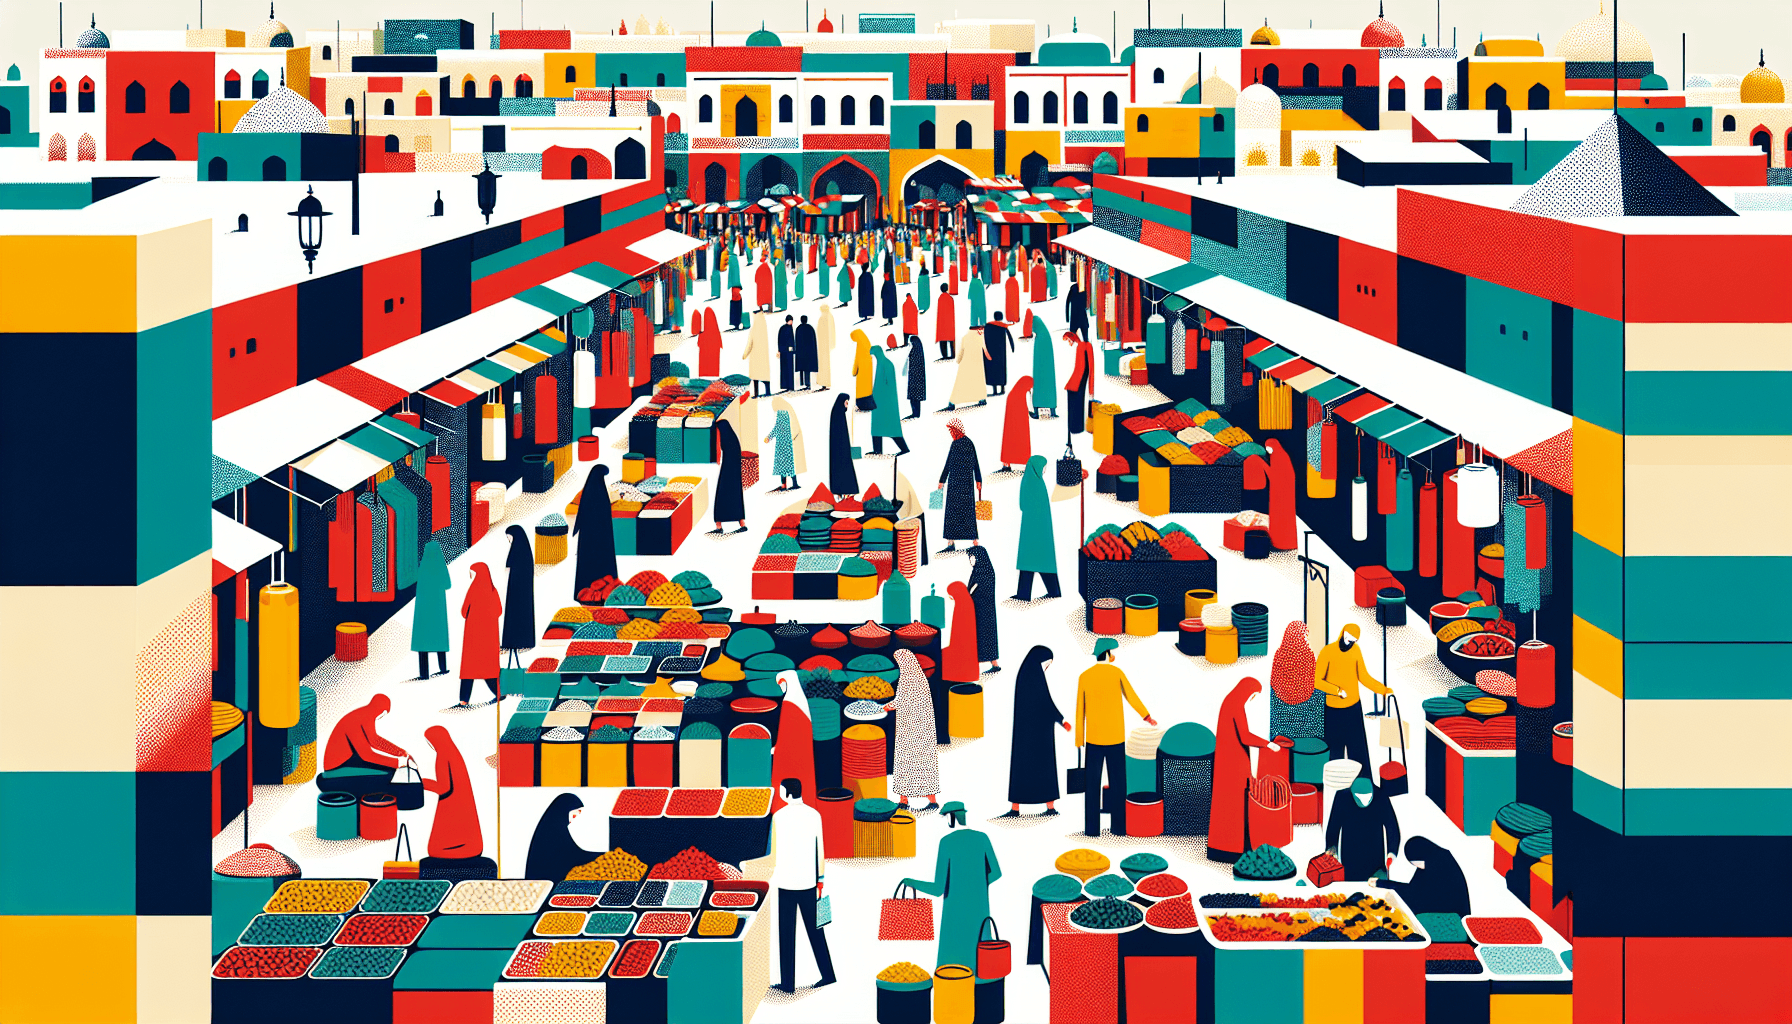 Bazaar in flat illustration style and white background, red #f47574, green #88c7a8, yellow #fcc44b, and blue #645bc8 colors.